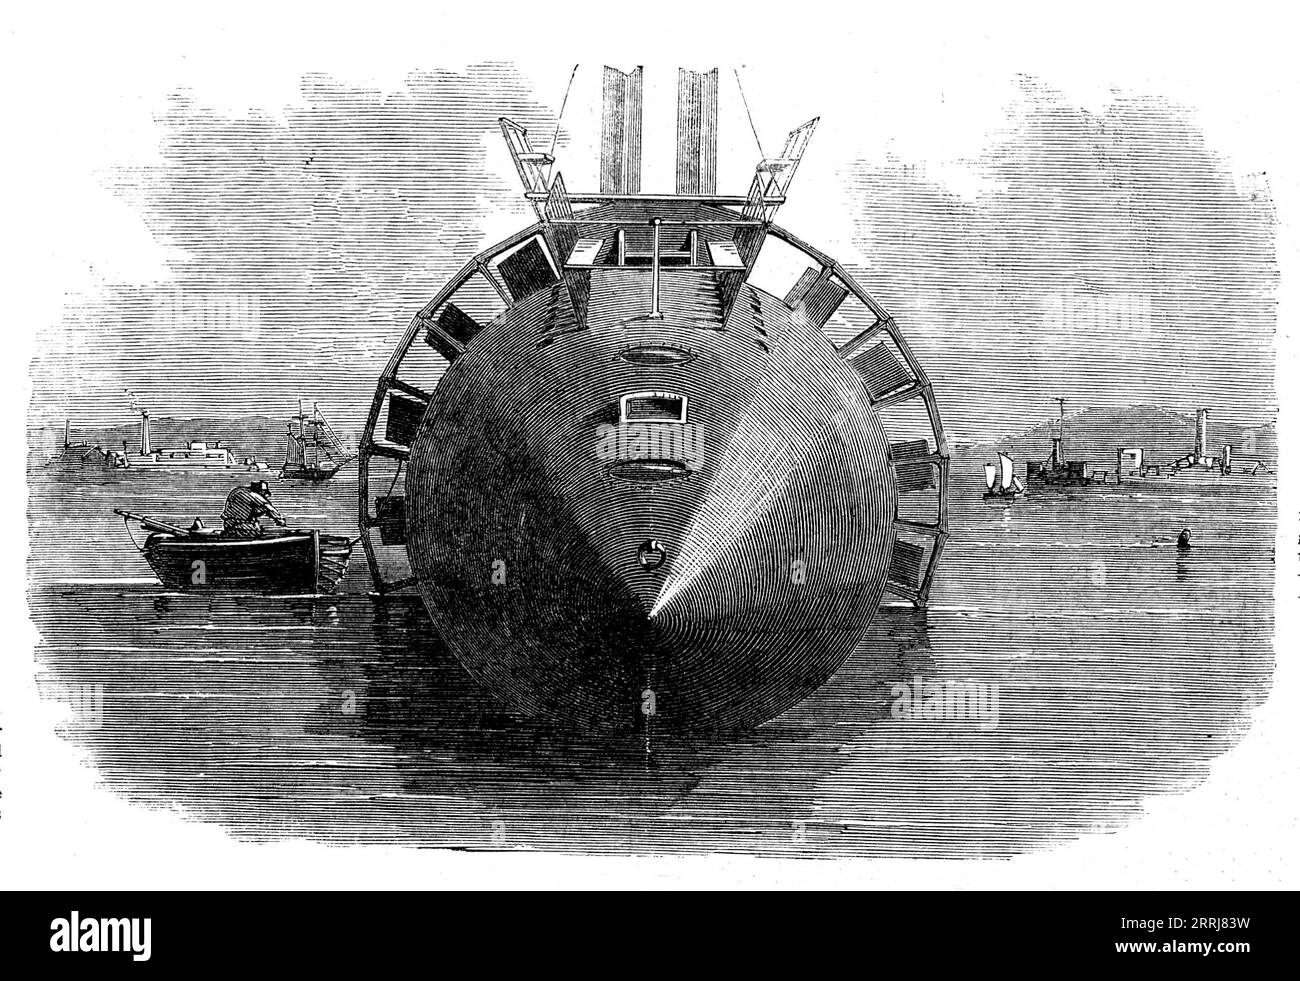 The Winans Steam-vessel - end view, 1858. The Cigar Ship, a 'singular vessel' which was launched near the Ferry Bay at Baltimore. It was designed by Ross Winans and his son Thomas. '...steam power on board seagoing vessels, when used in aid of sails, ensures, to a great extent, dispatch, certainty of action, and uniformity in the time of their voyages. Now, we believe that by discarding sails entirely, and all the necessary appendages, and building the vessel of iron, having reference to the use of steam alone, these most desirable ends [greater safety, economy of transportation by sea] may be Stock Photo